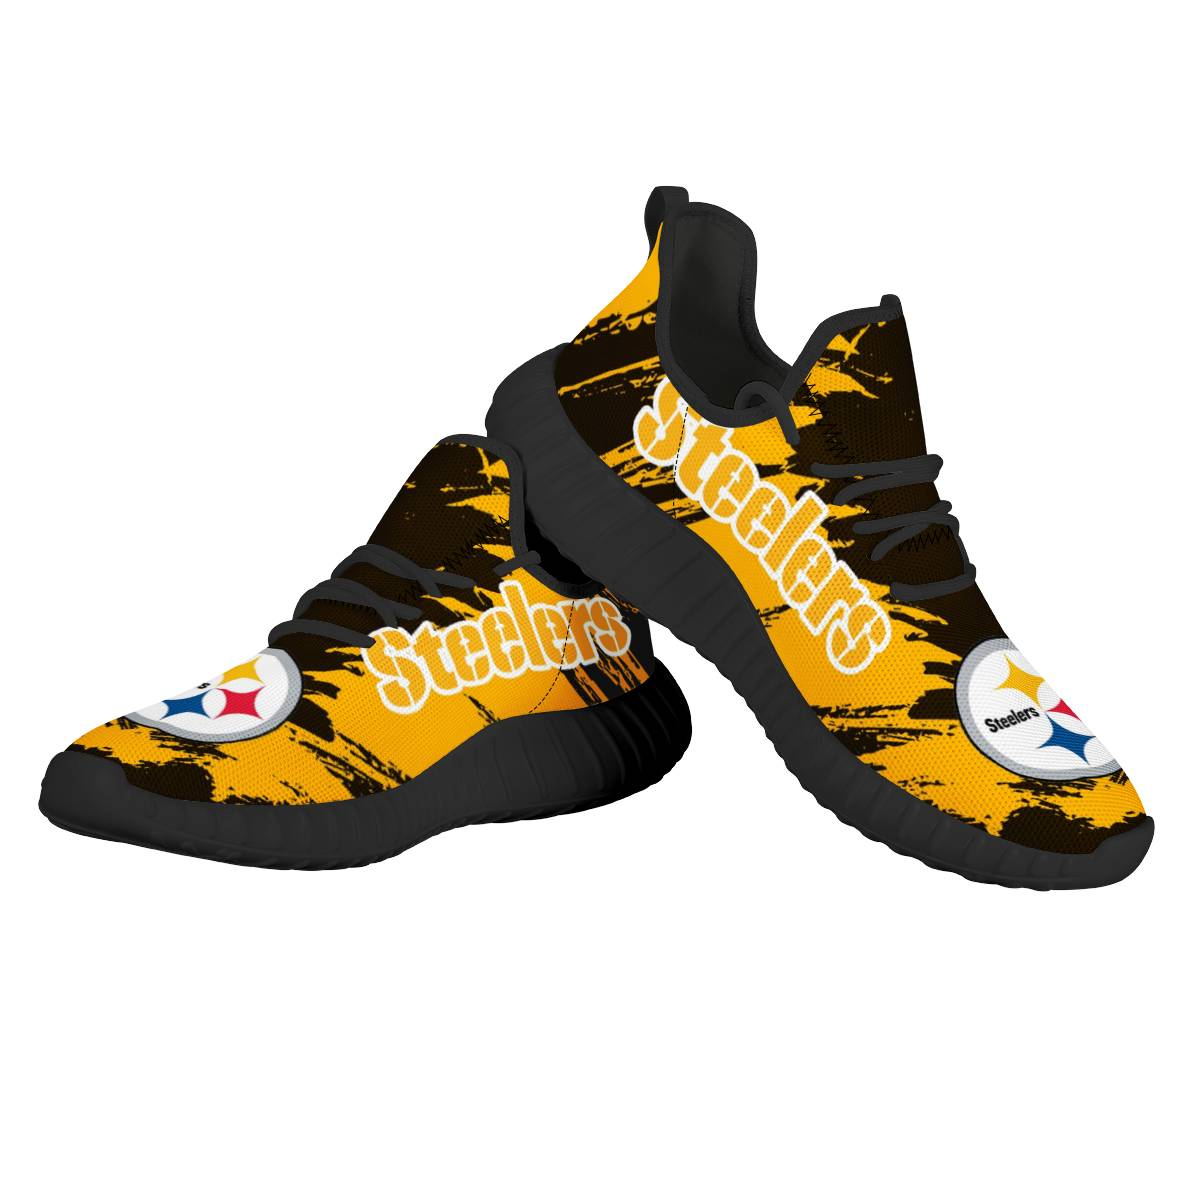 Men's Pittsburgh Steelers Mesh Knit Sneakers/Shoes 014